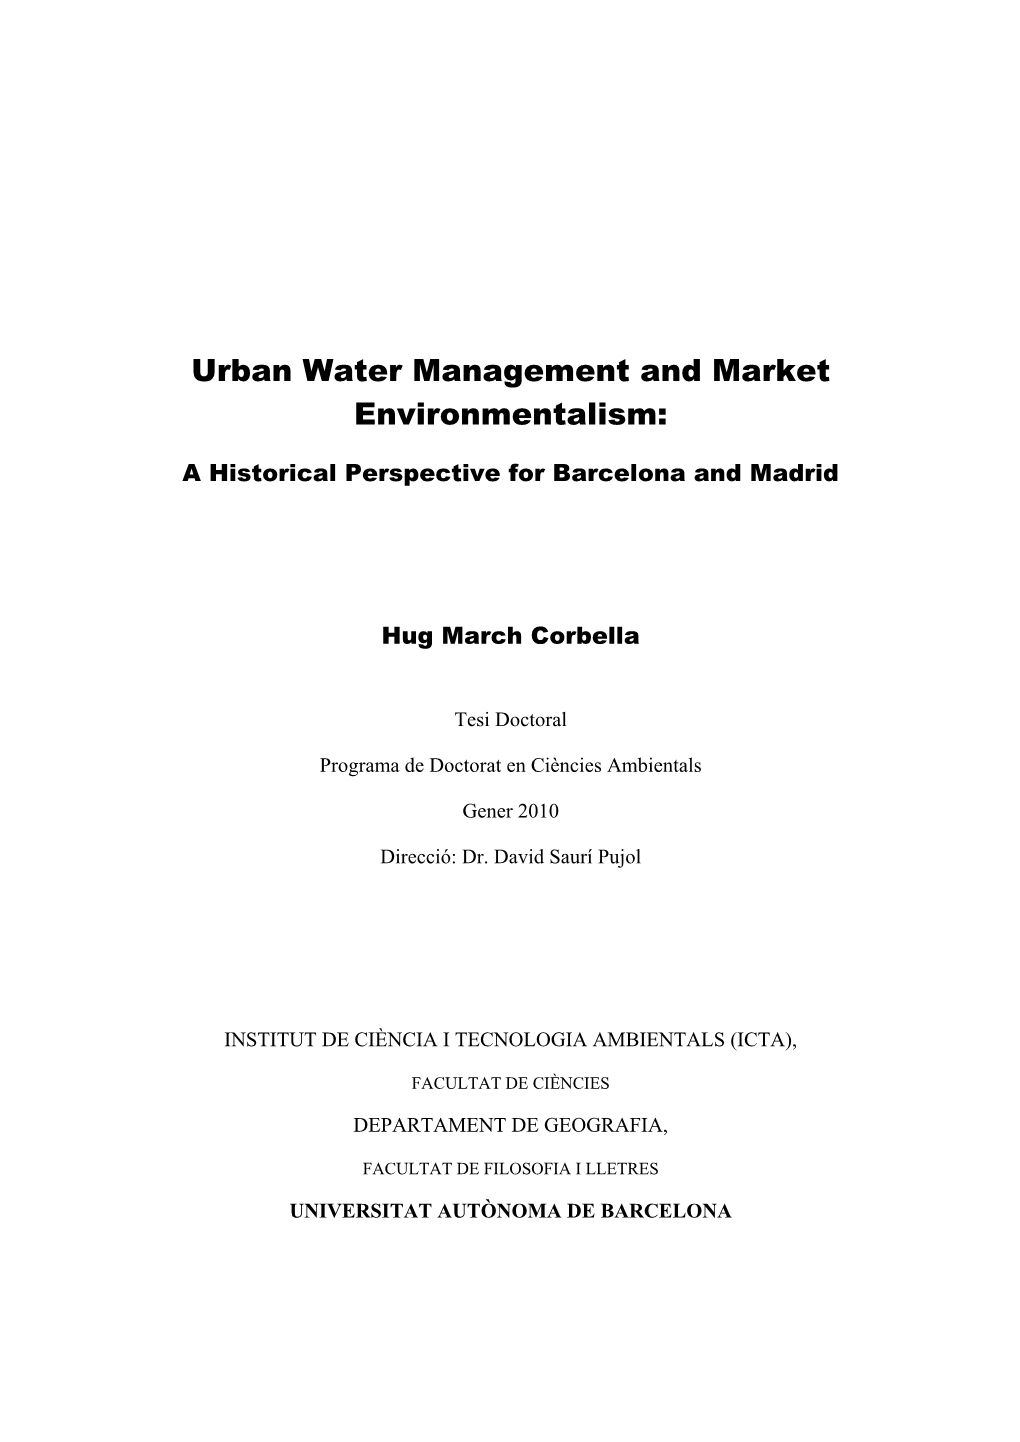 Urban Water Management and Market Environmentalism in Spain